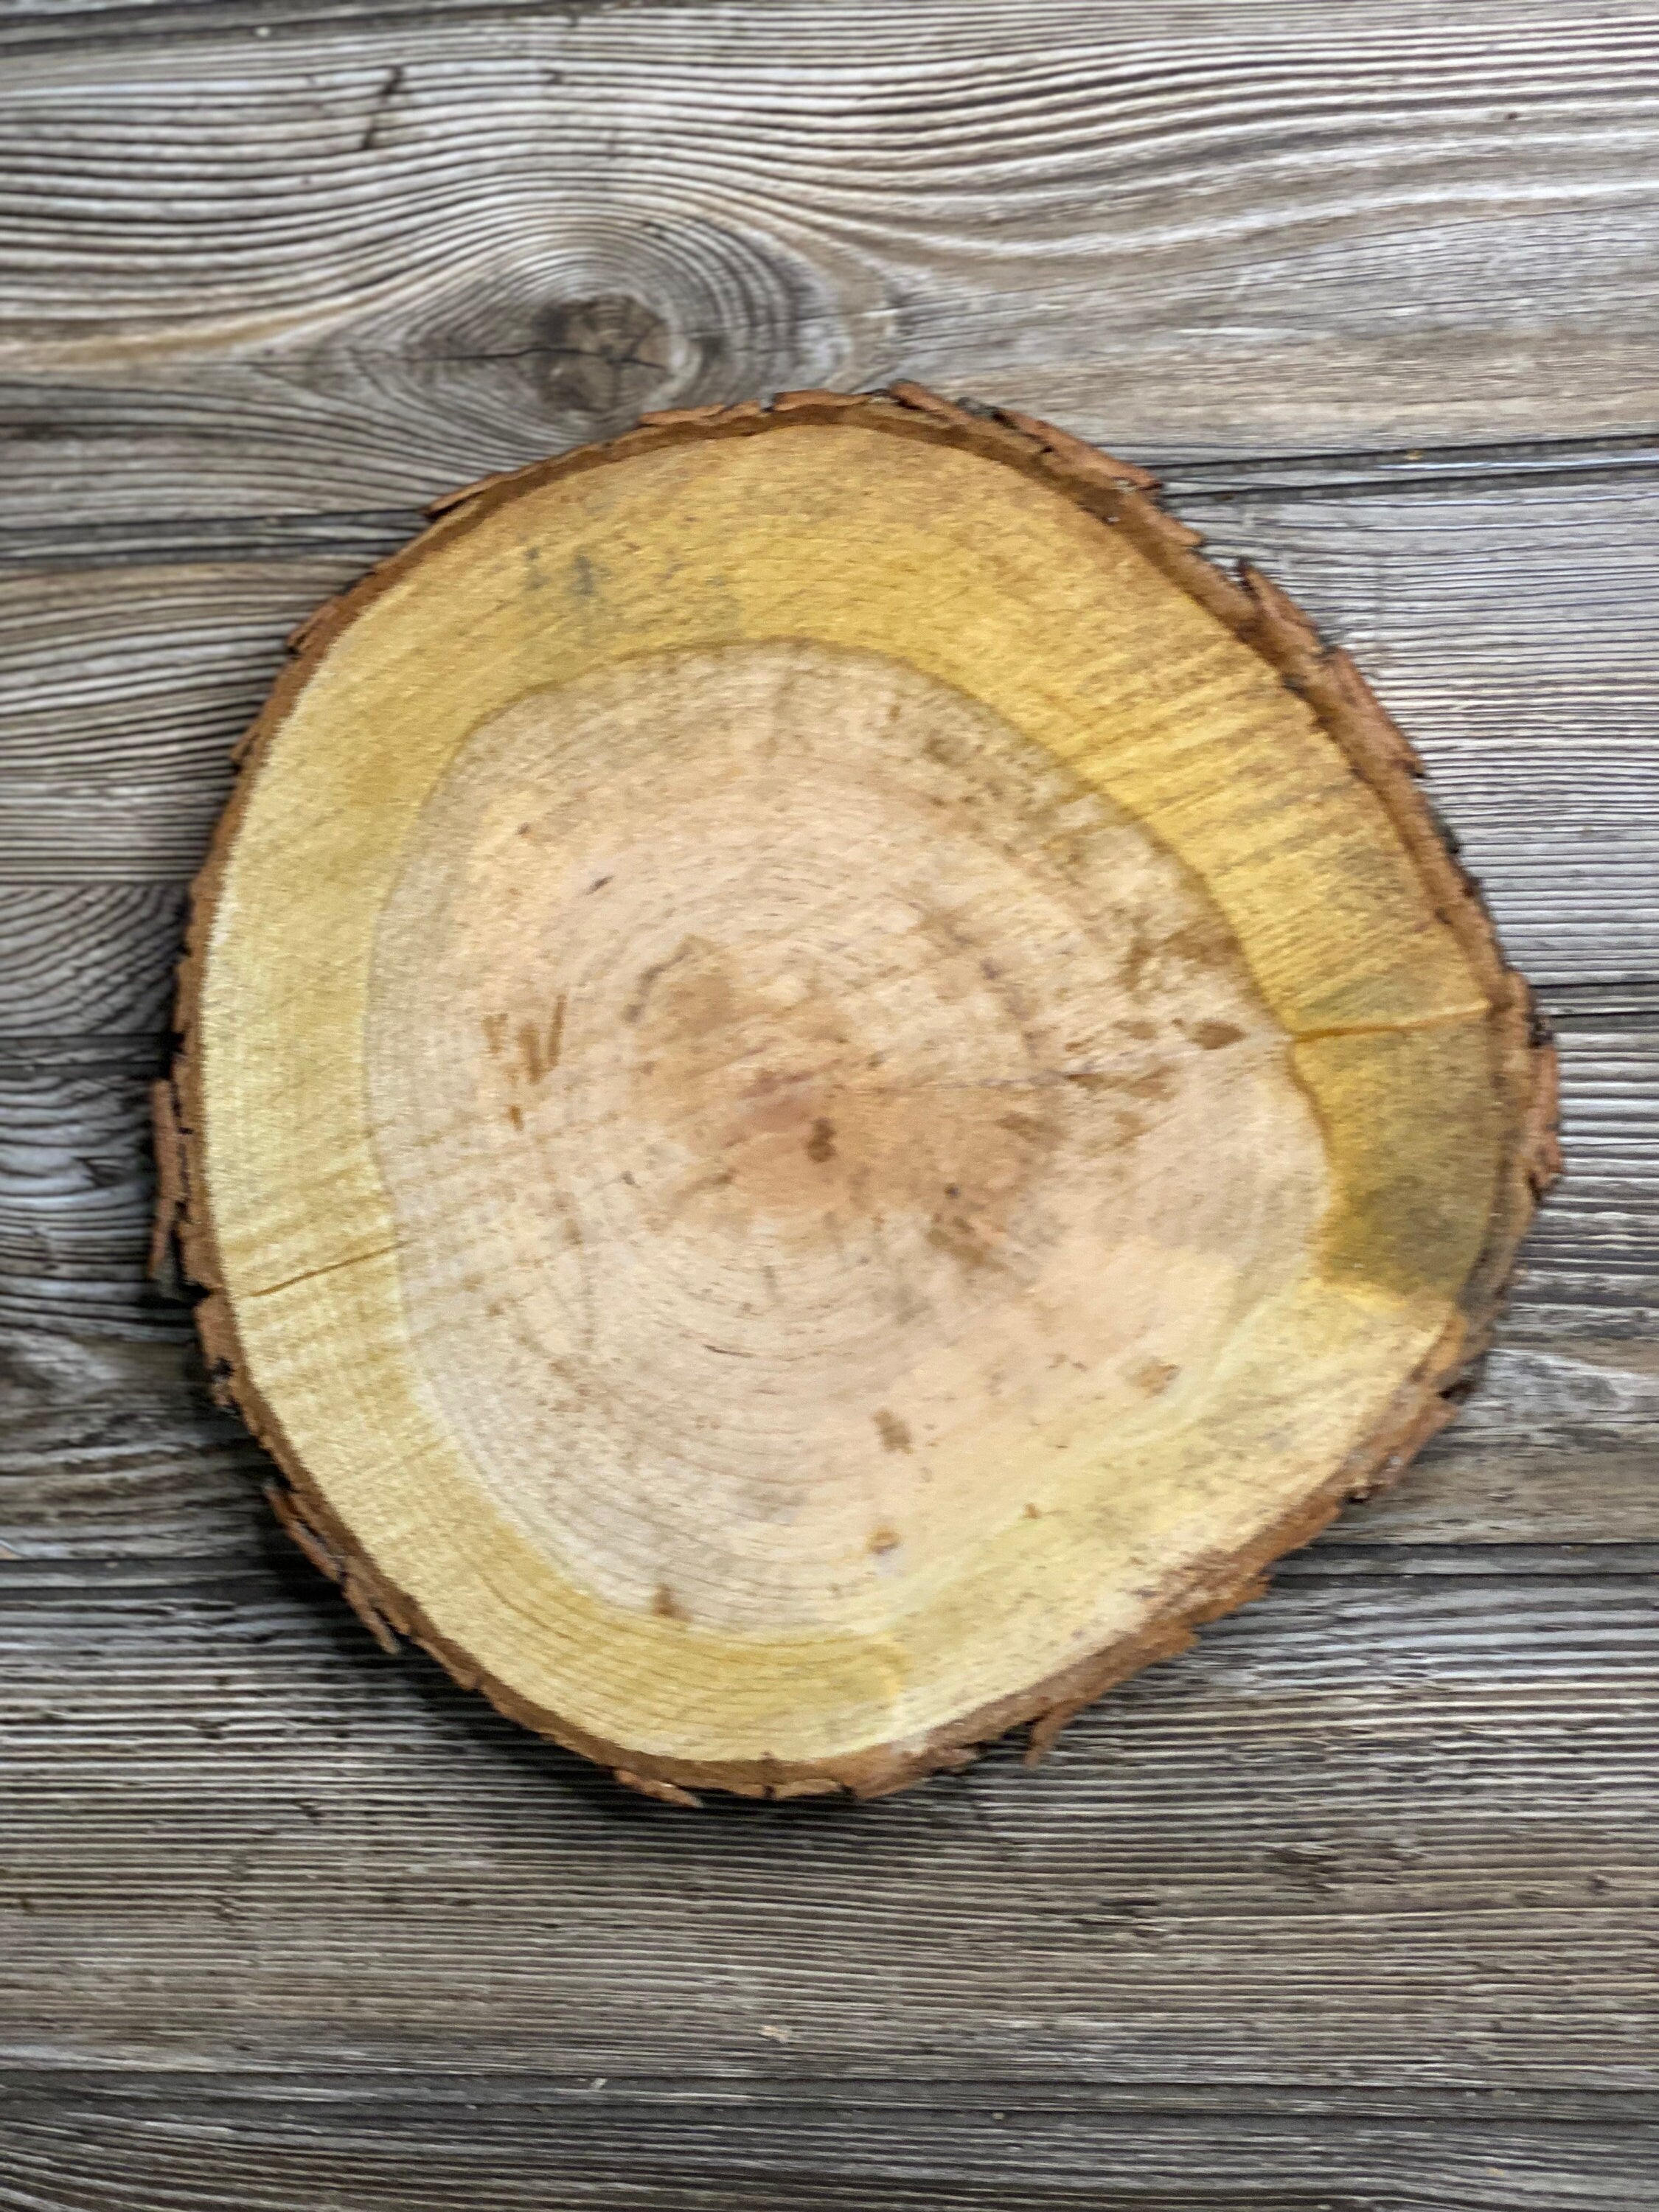 Cherry Wood Slice, Approximately 10 Inches Long by 9.5 Inches Wide and 1.5 Inch Thick